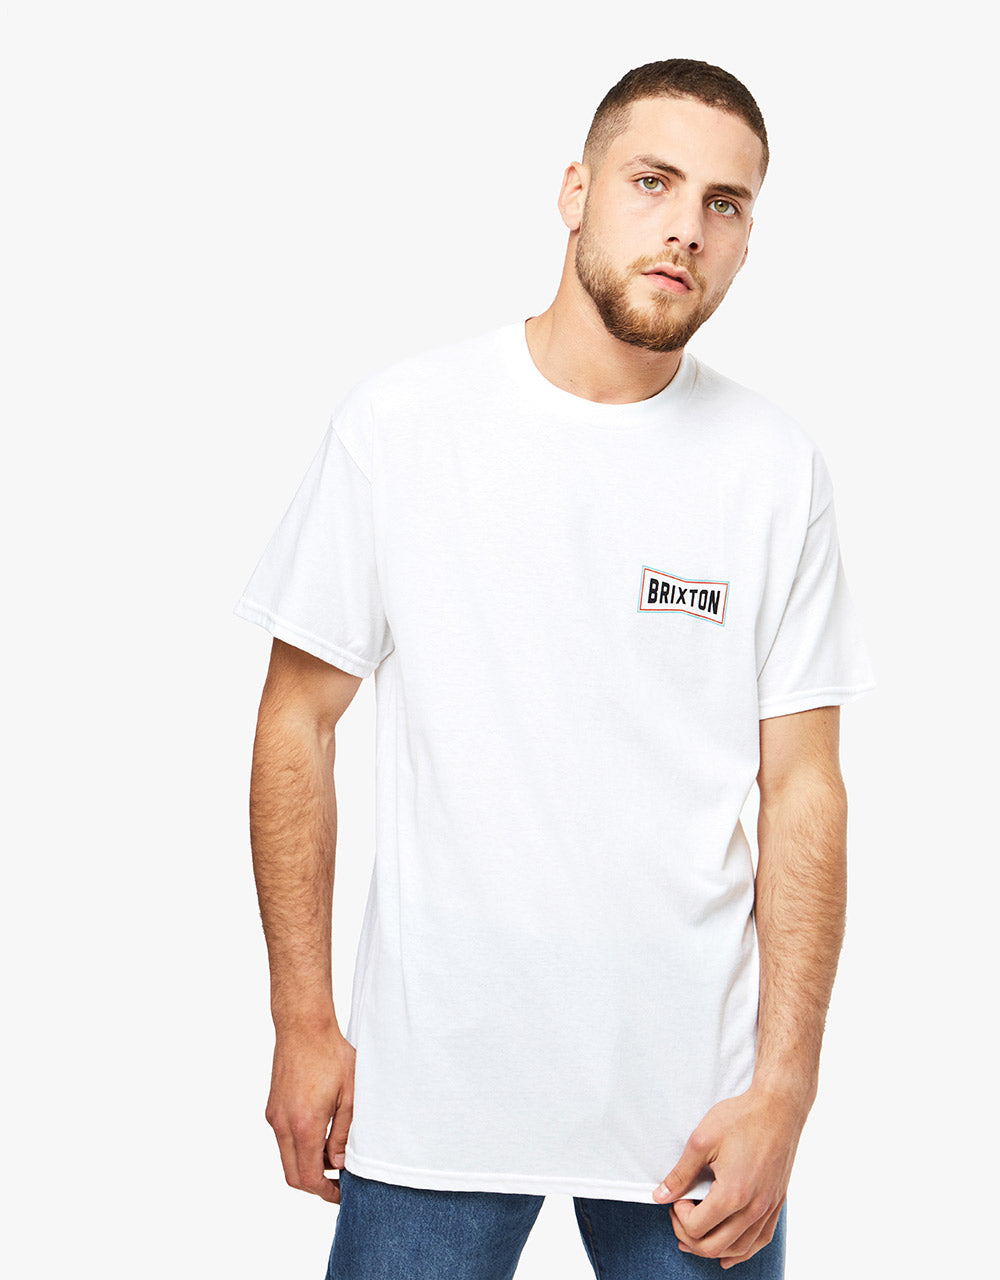 Brixton Truss T-Shirt - White/Teal/Red